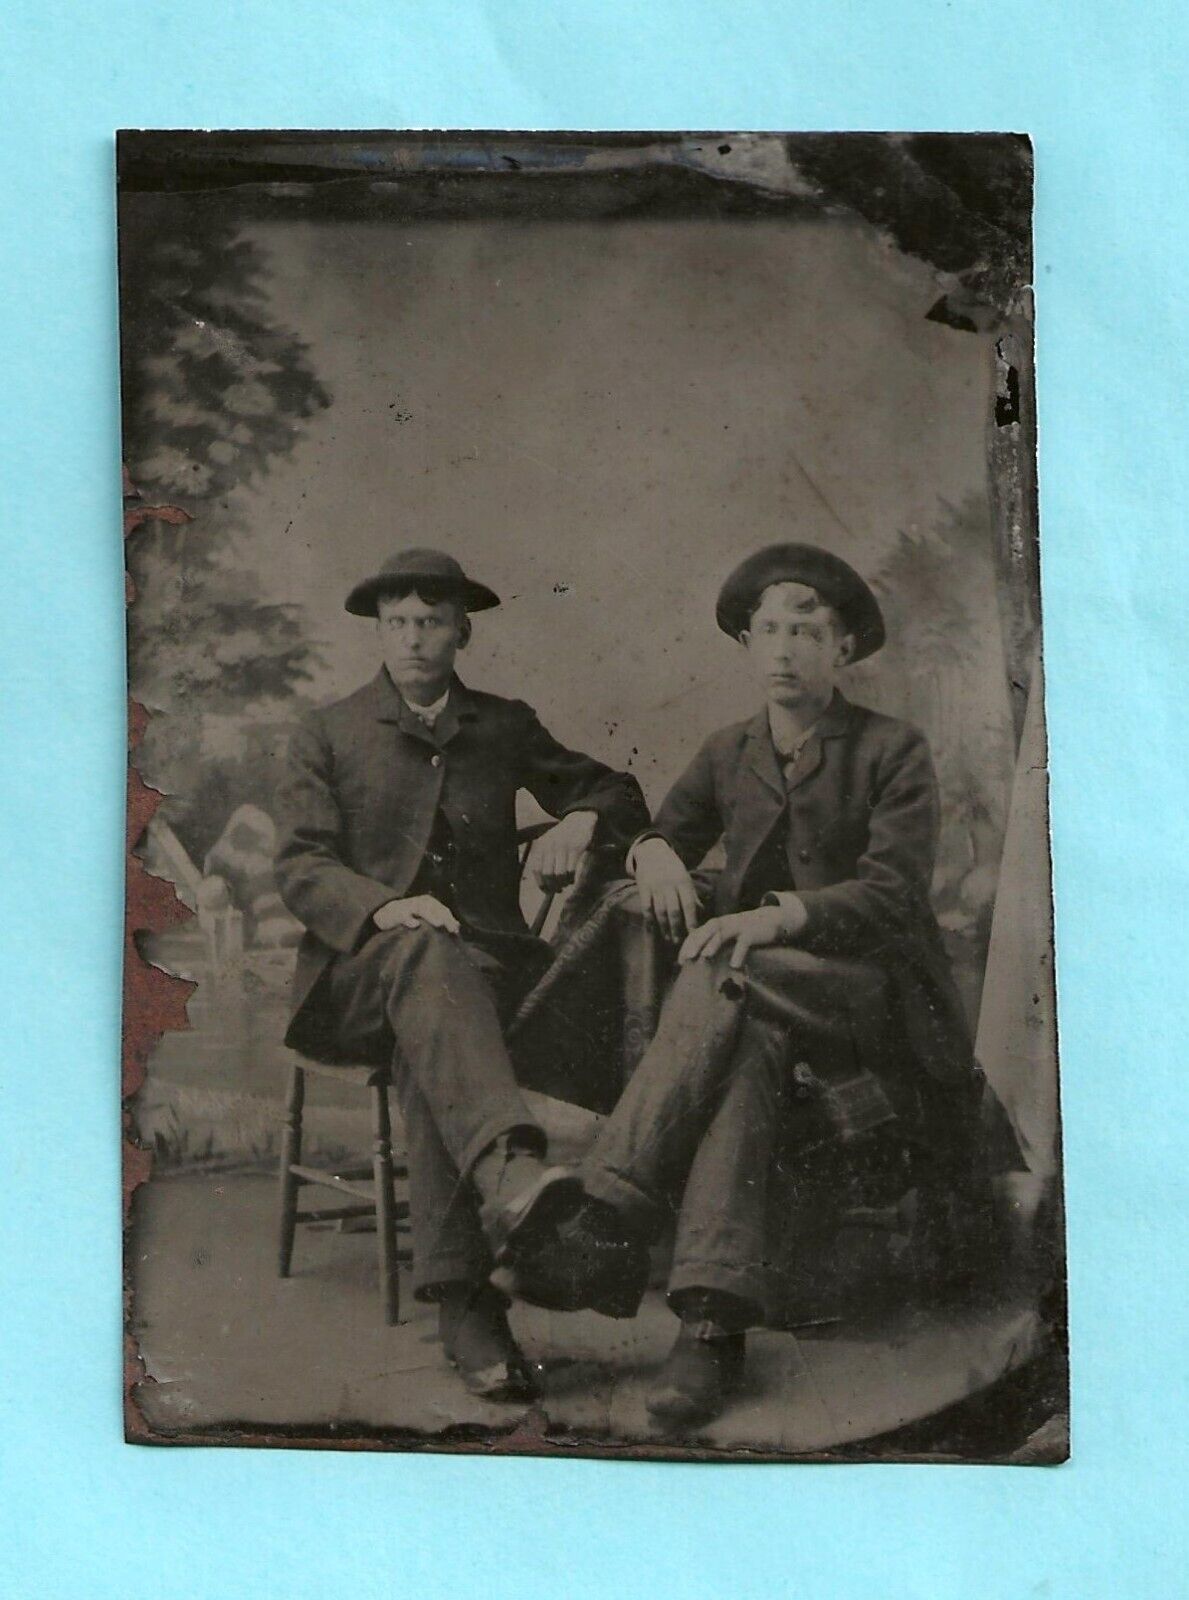 Tintype.  Two handsome young men hanging out.   Legs touching.